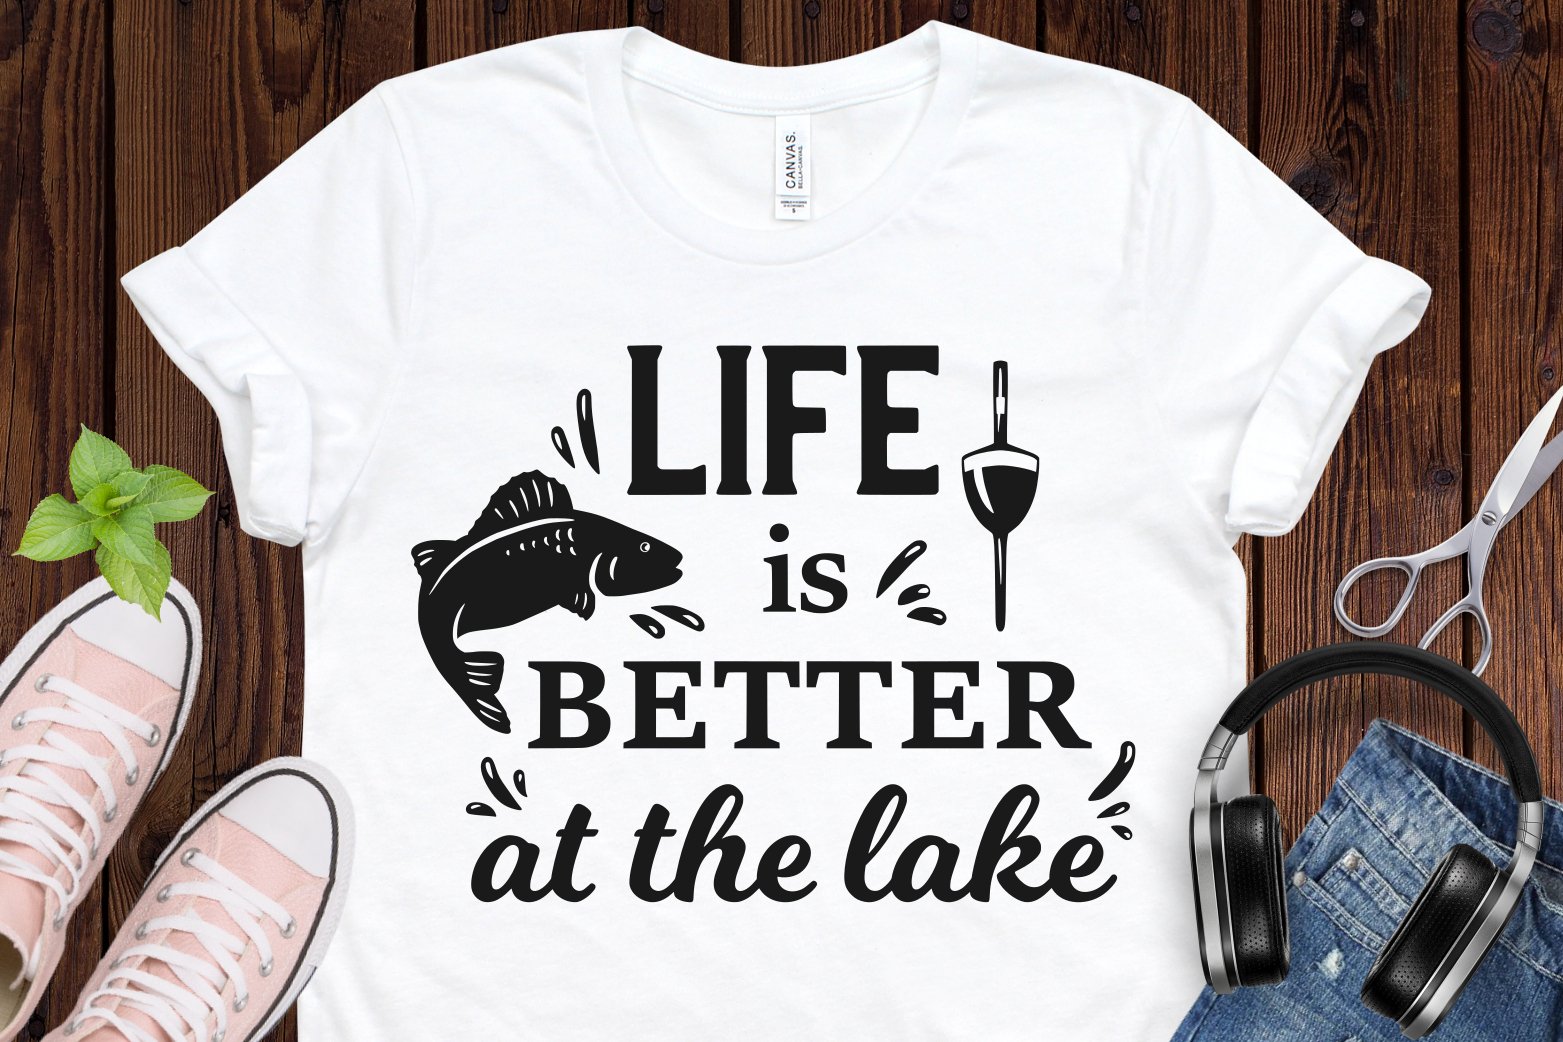 Life is better at the lake.